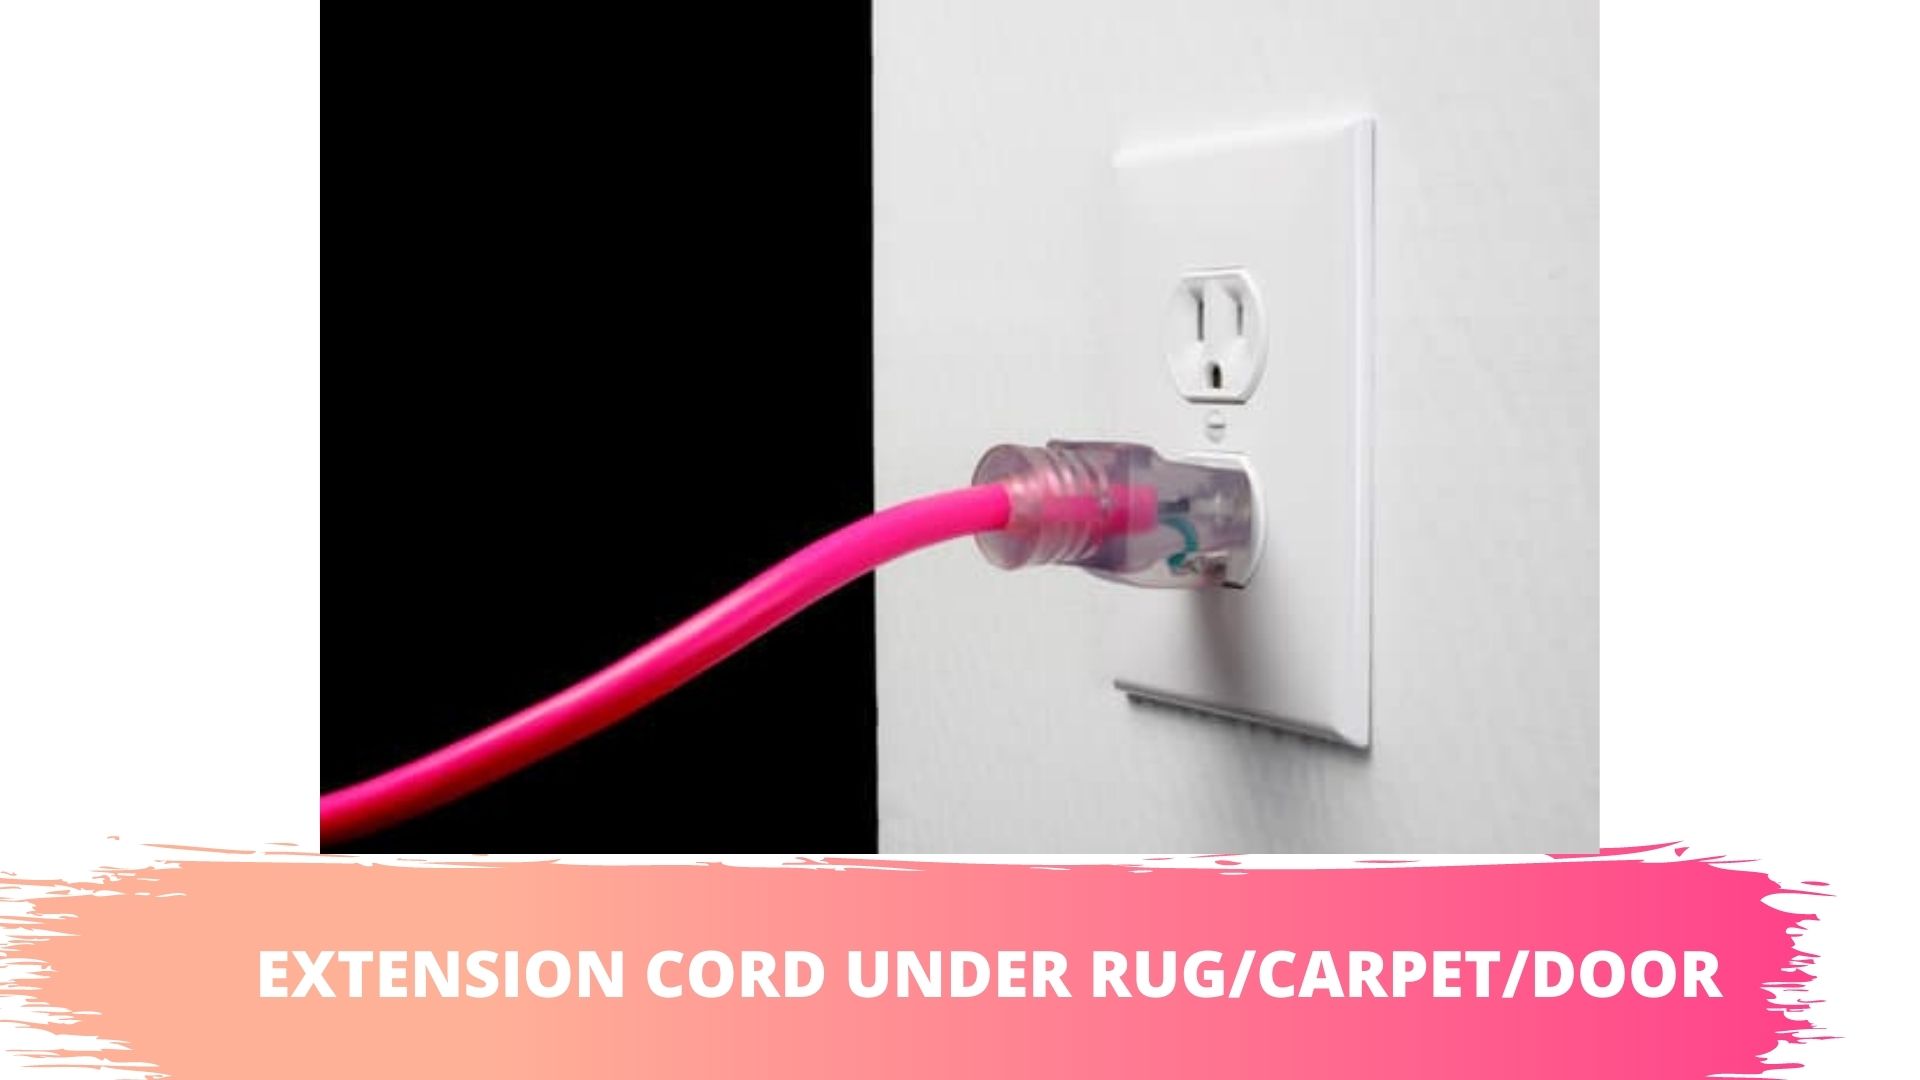 can i put an extension cord under a rug/carpet